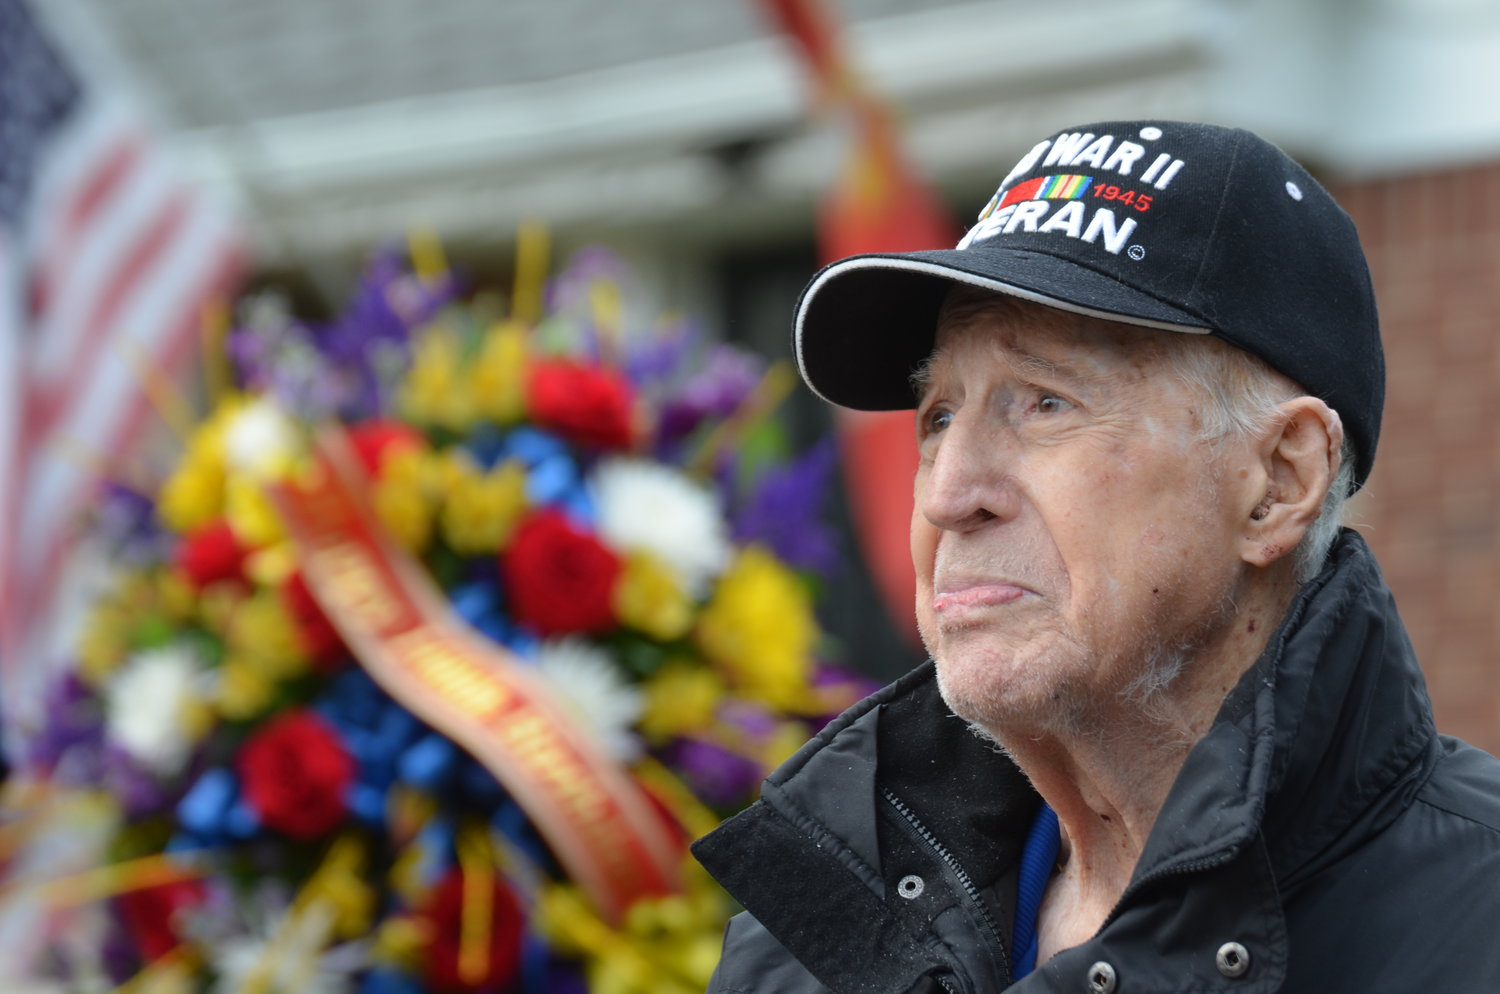 Andy Butera turned 100 on May 24, and to help him celebrate, the East Meadow Fire Department and American Legion Post 1082 treated him to a drive-by parade.